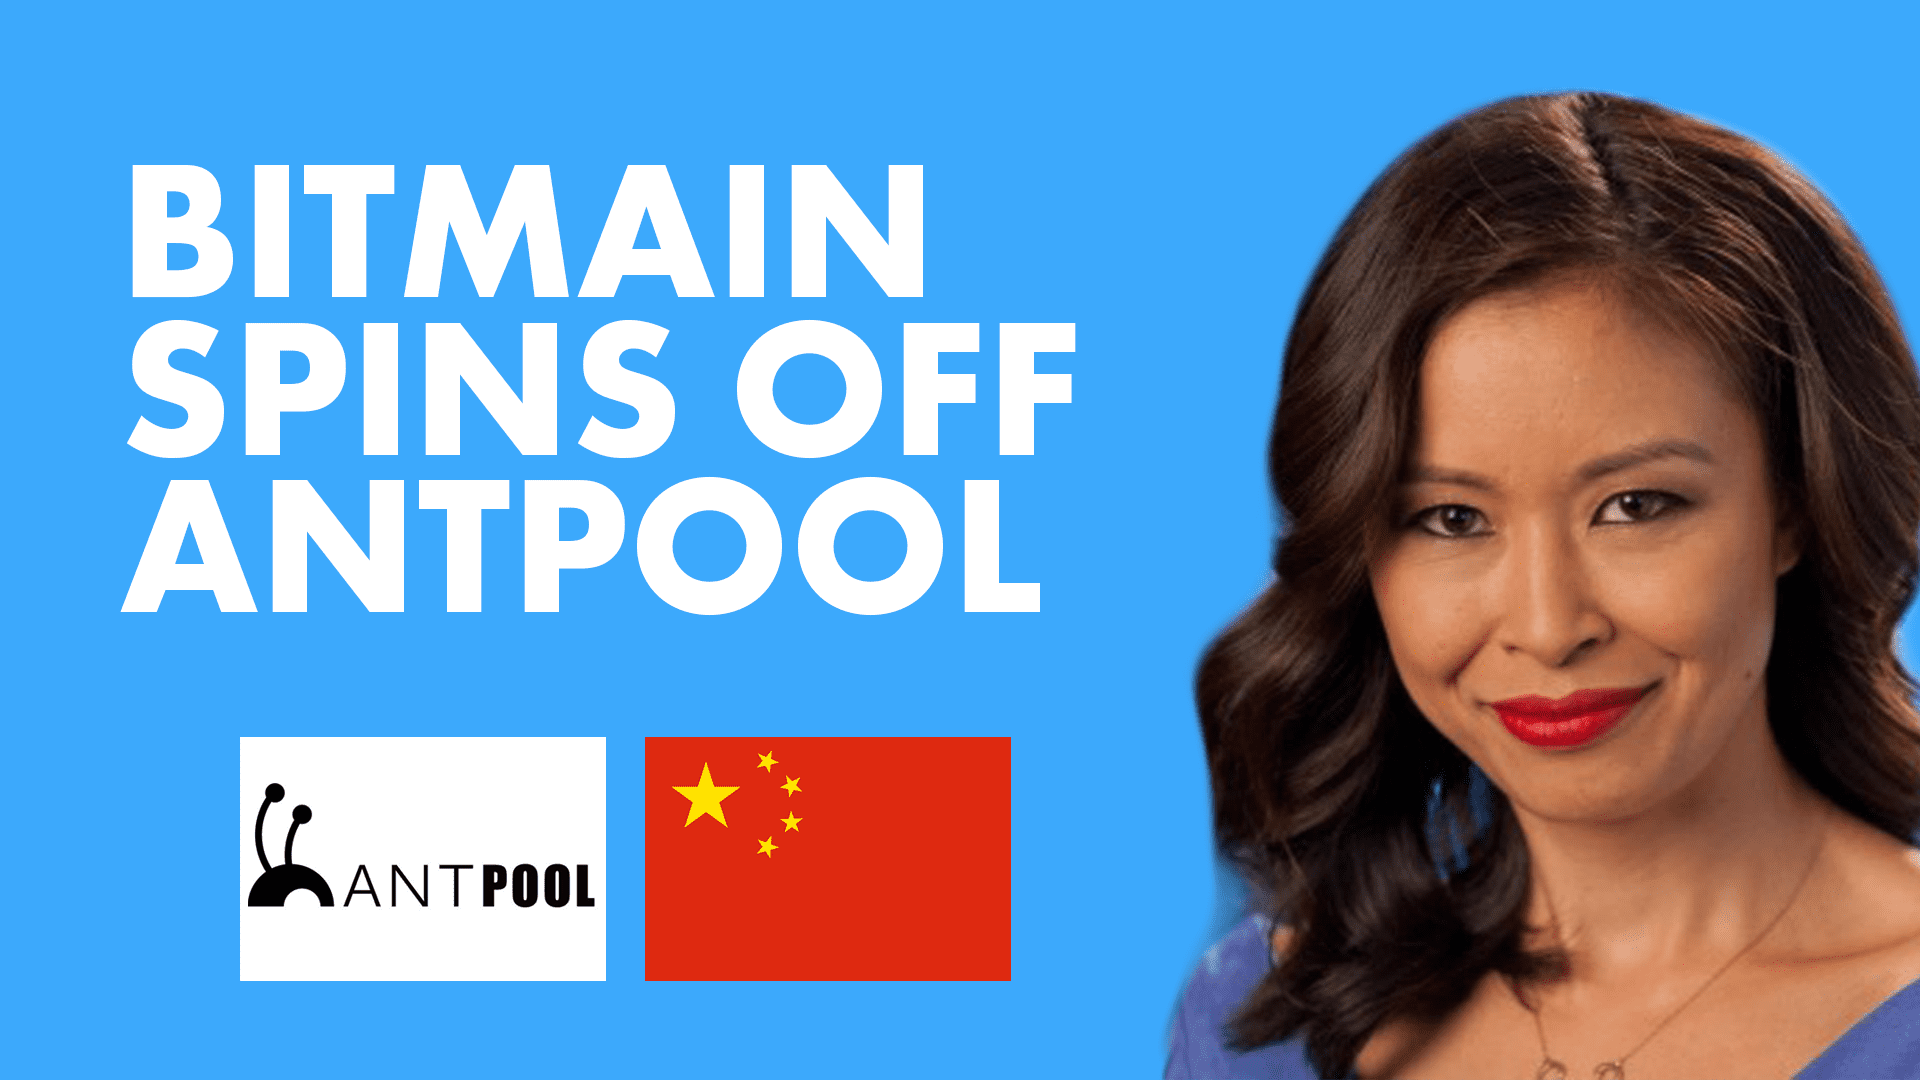 Bitmain Spins Off Antpool; Binance CEO Willing To Step ...